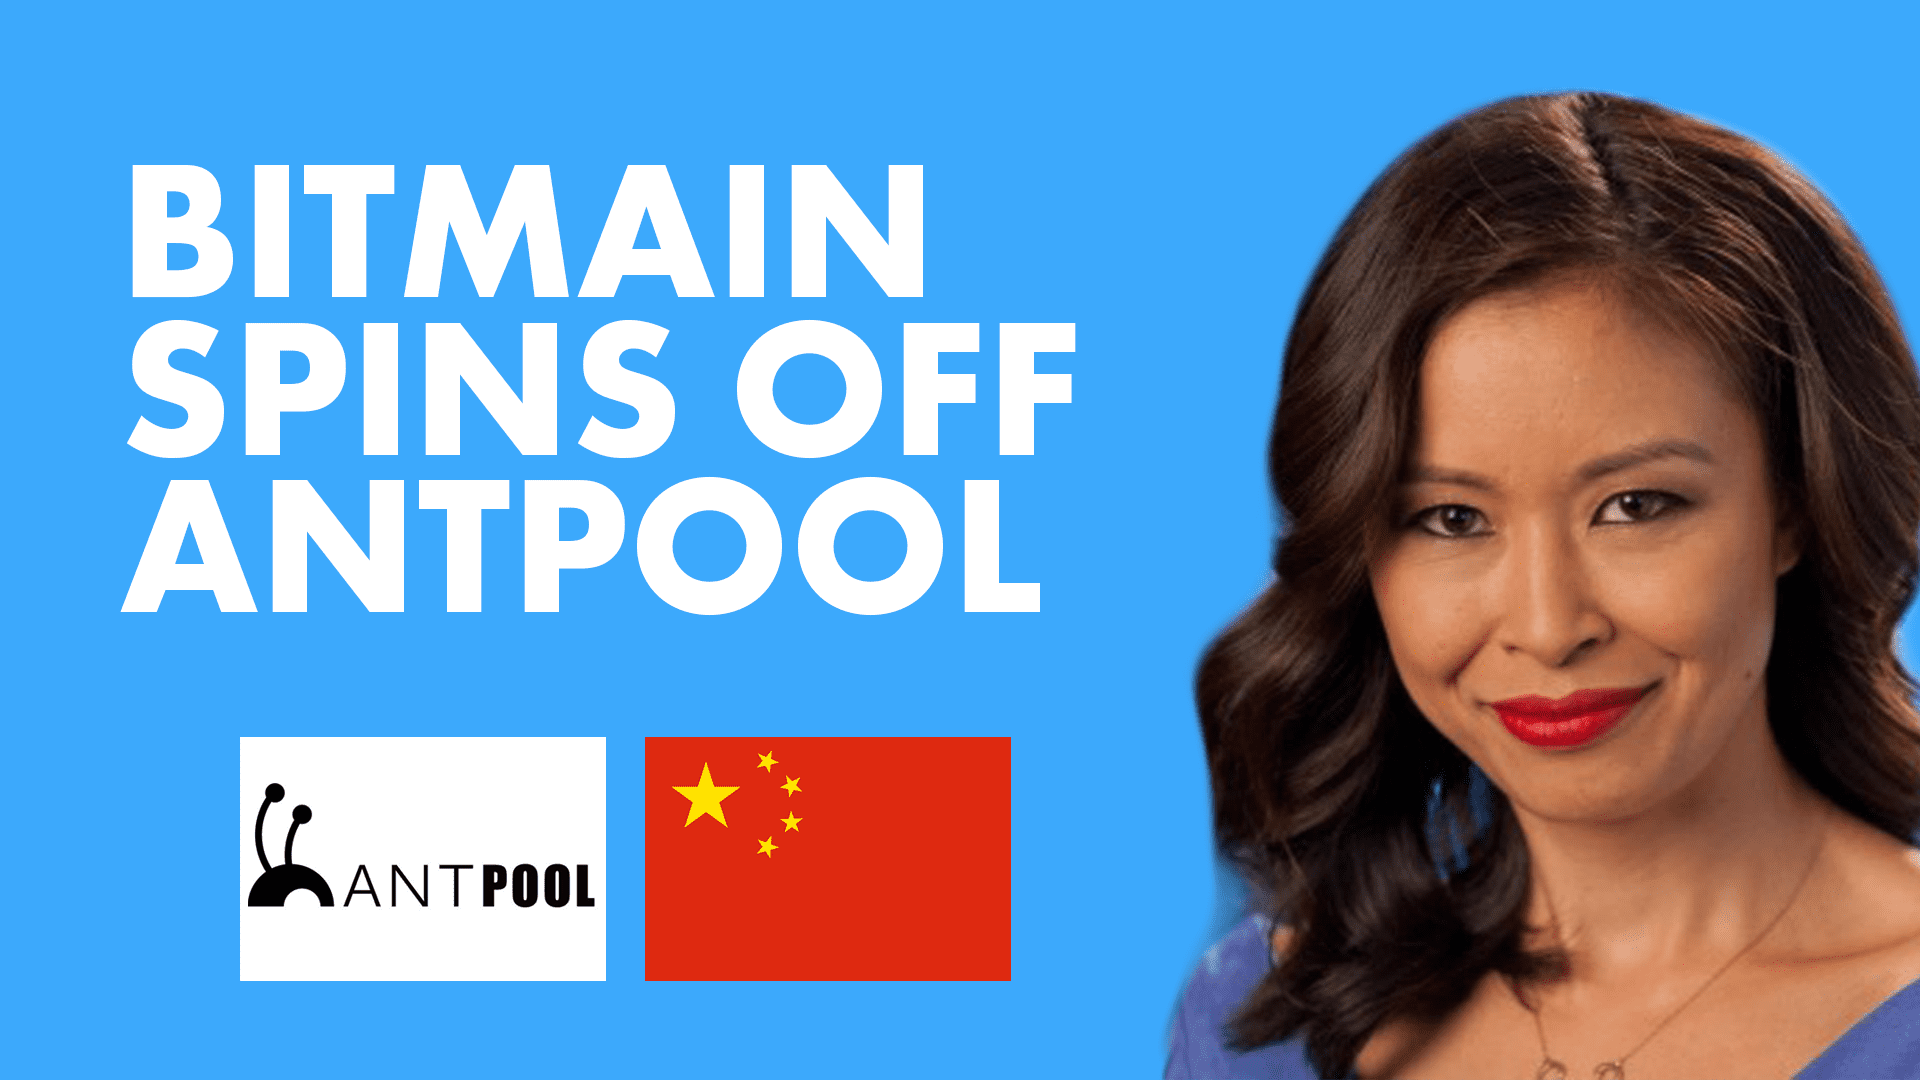 Bitmain Spins Off Antpool; Binance CEO Willing To Step ...